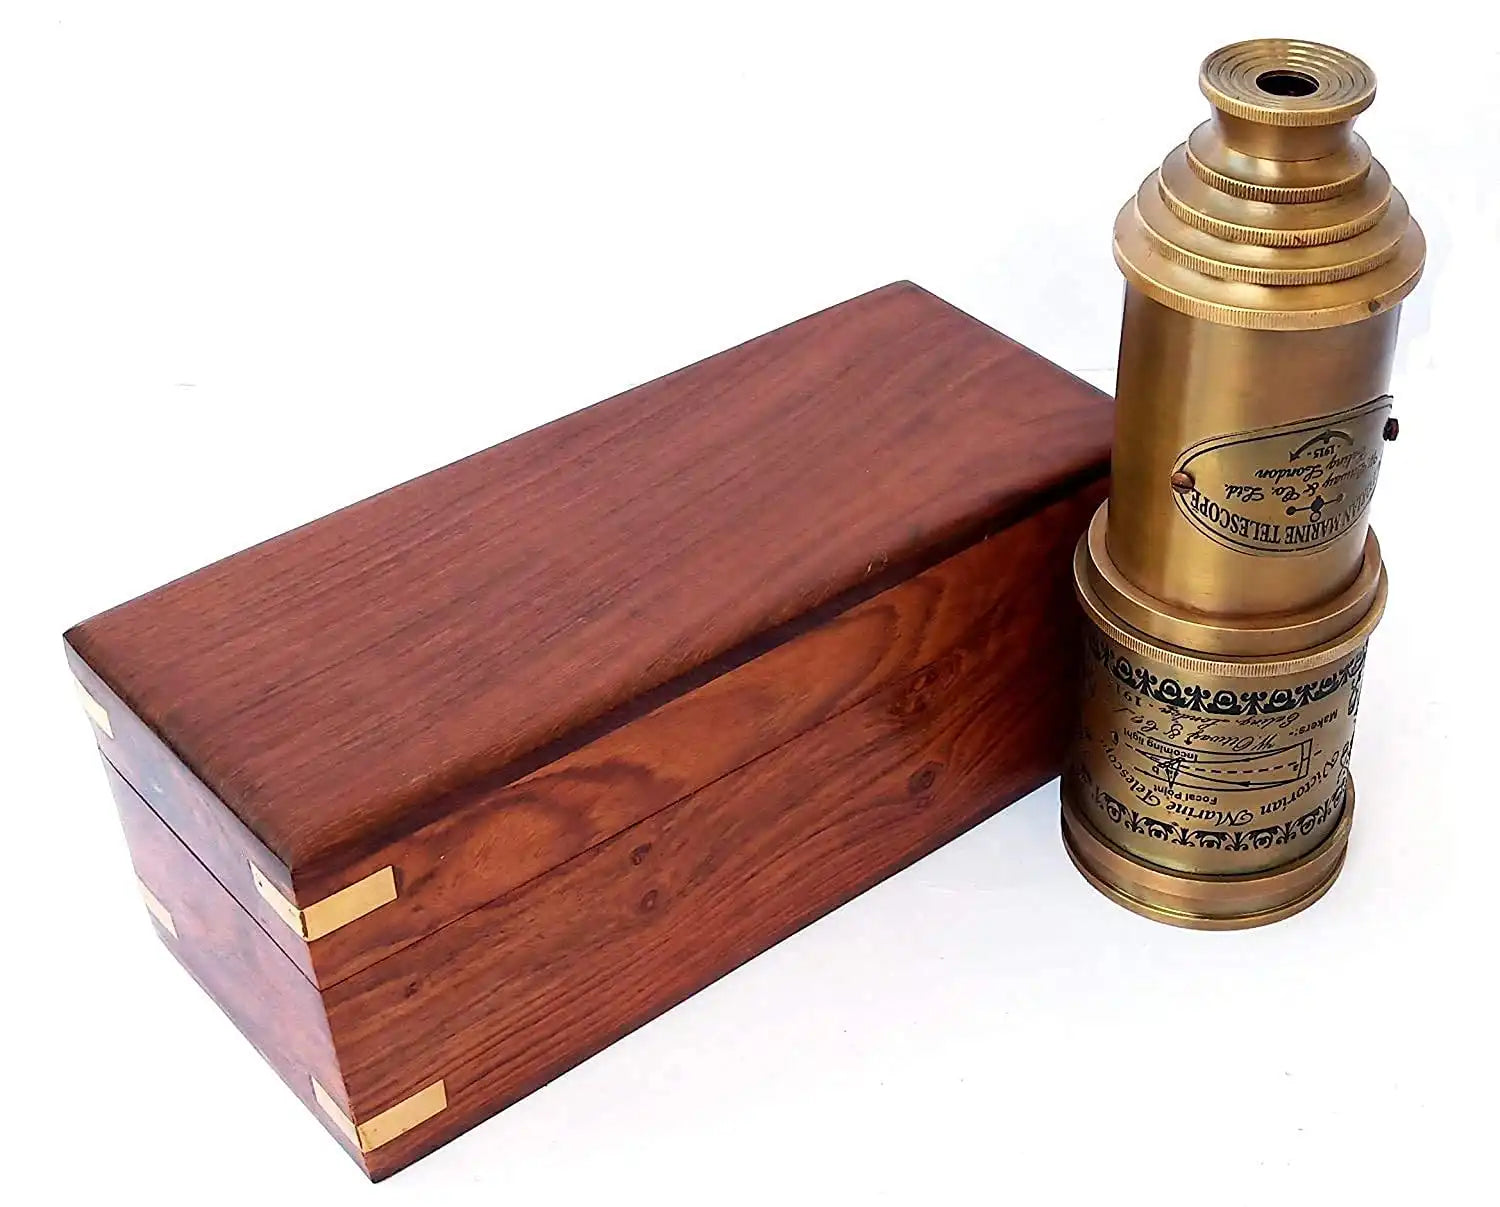 Vintage Brass Telescope Victorian 1915  Martine  Antique  Full Functional  with Wooden Gift Box  20 Inch